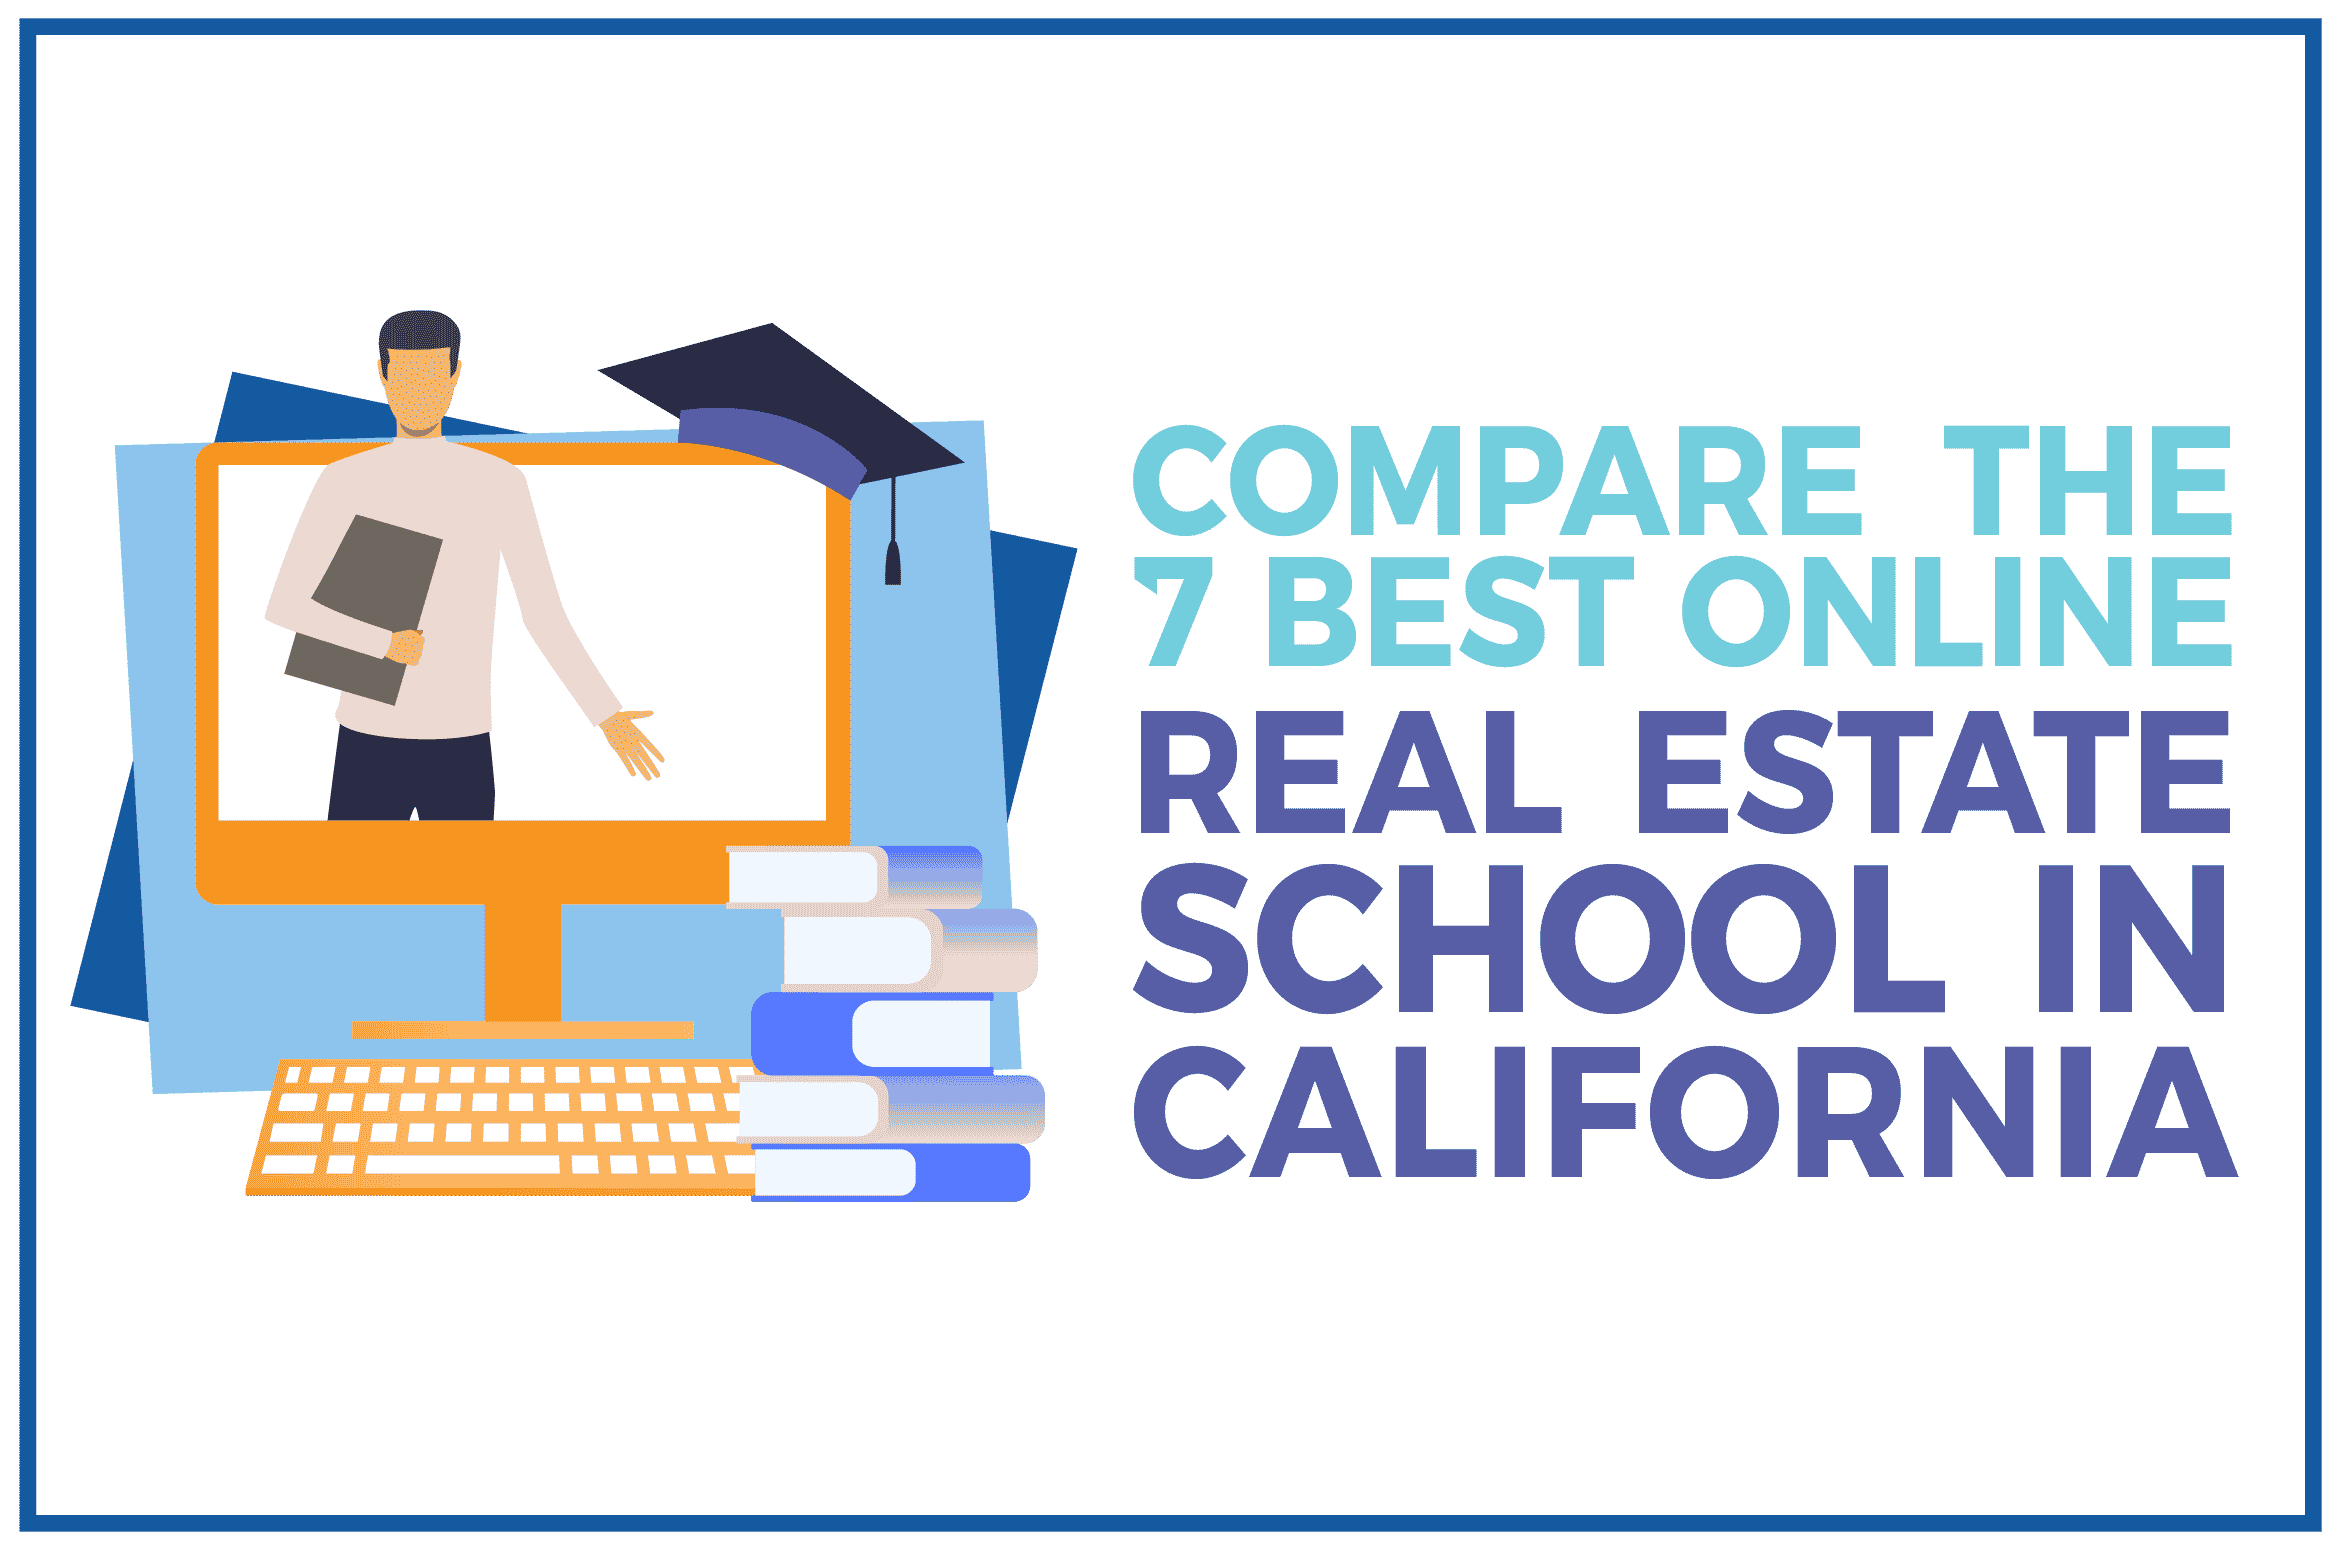 compare the best online real estate school in california